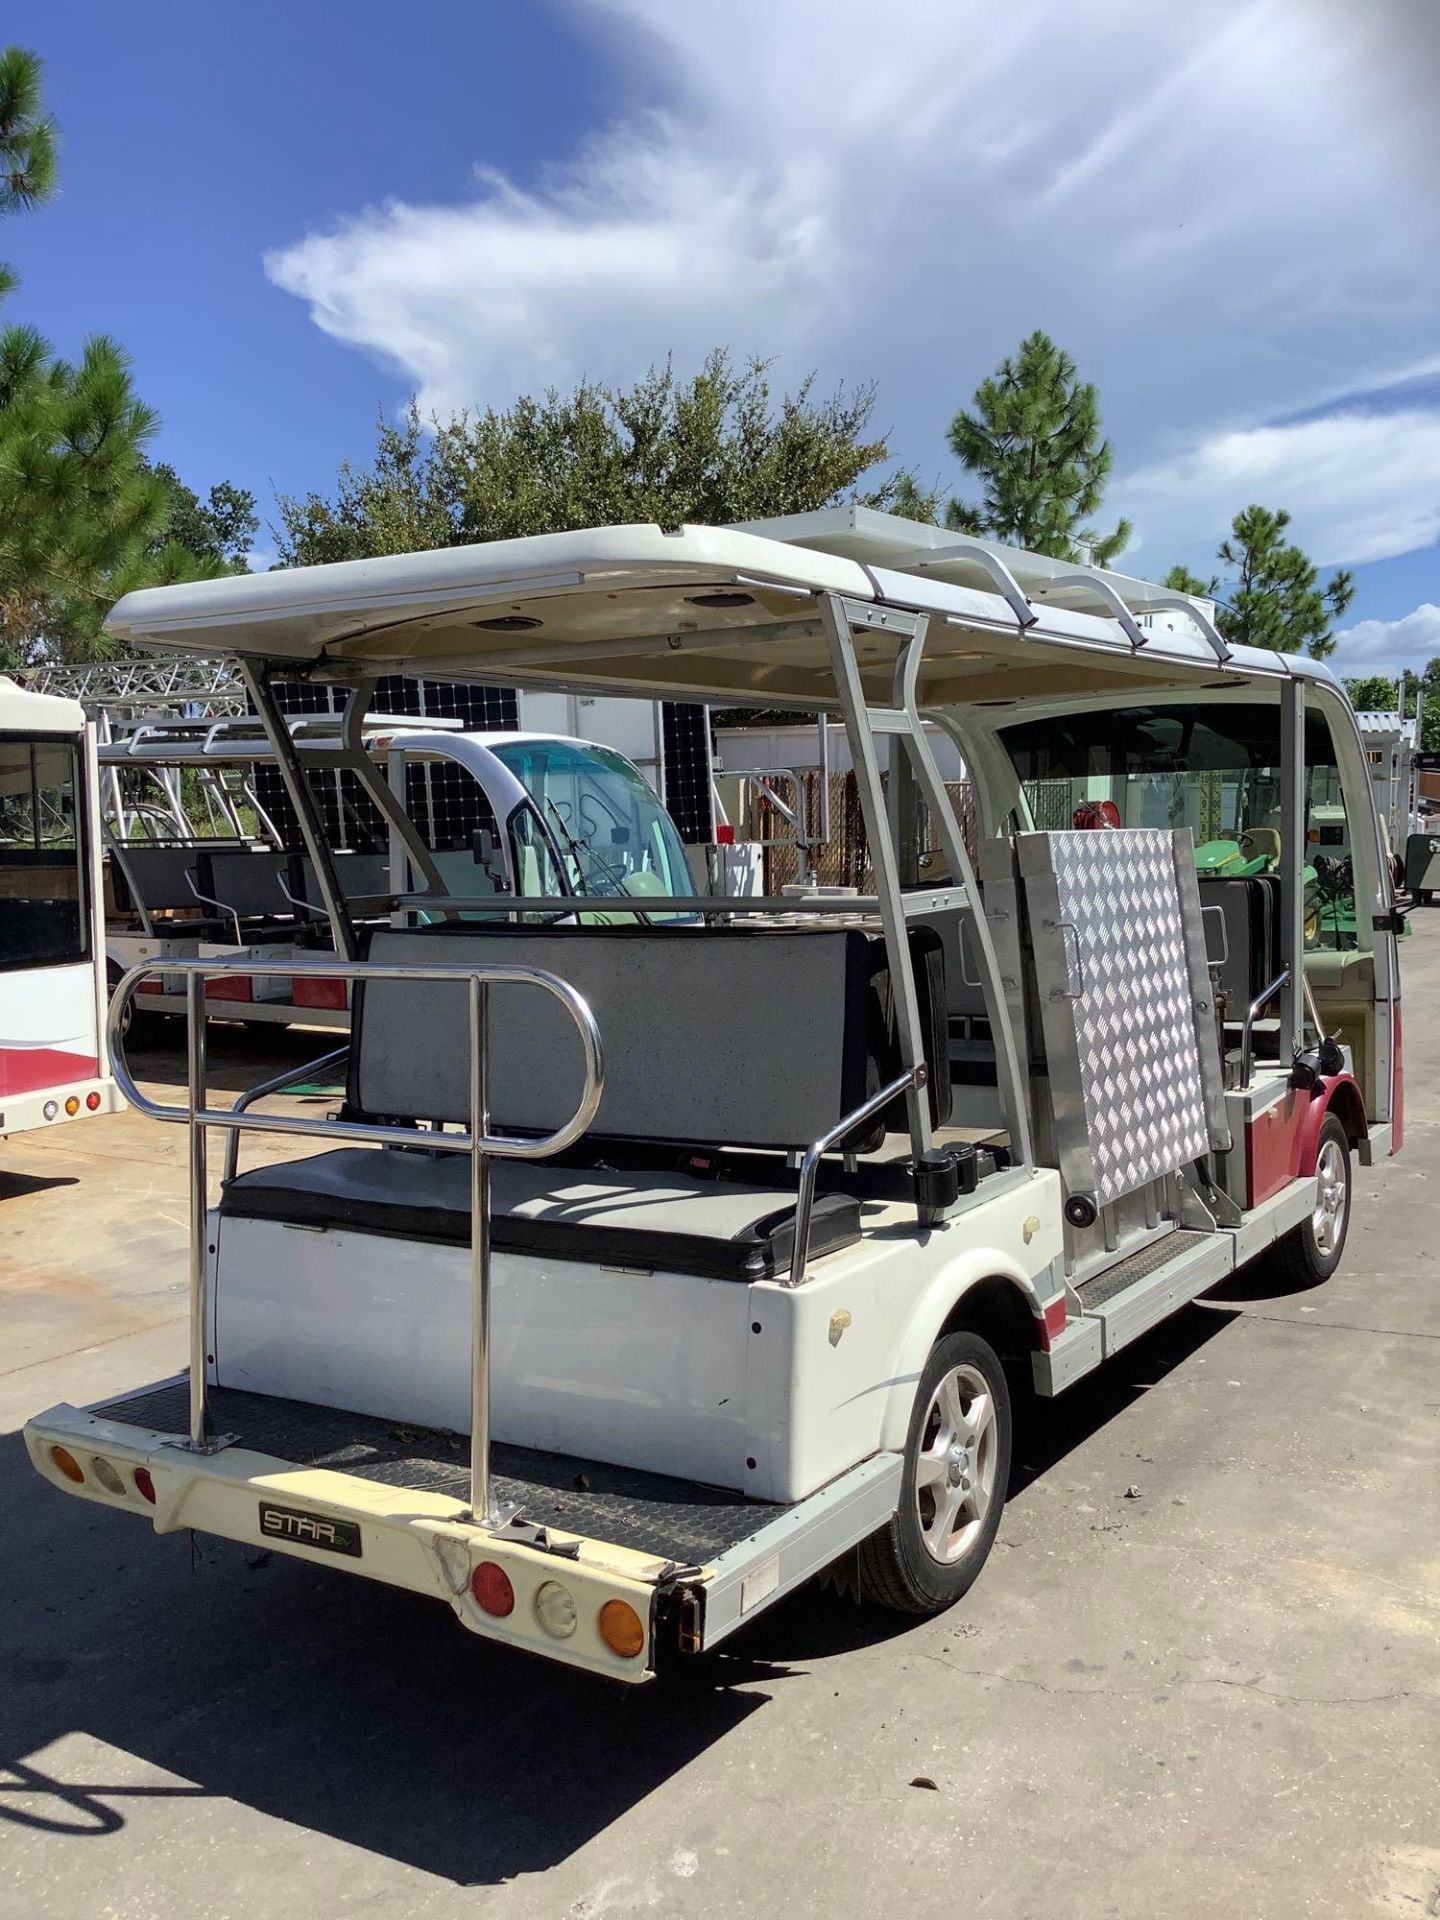 2015 STAR EV SHUTTLE CART MODEL STAR-BN72-11-AC-WHEELCHAIR, ELECTRIC, SOLA PANEL ATTACHED, DOME LIGH - Image 7 of 29